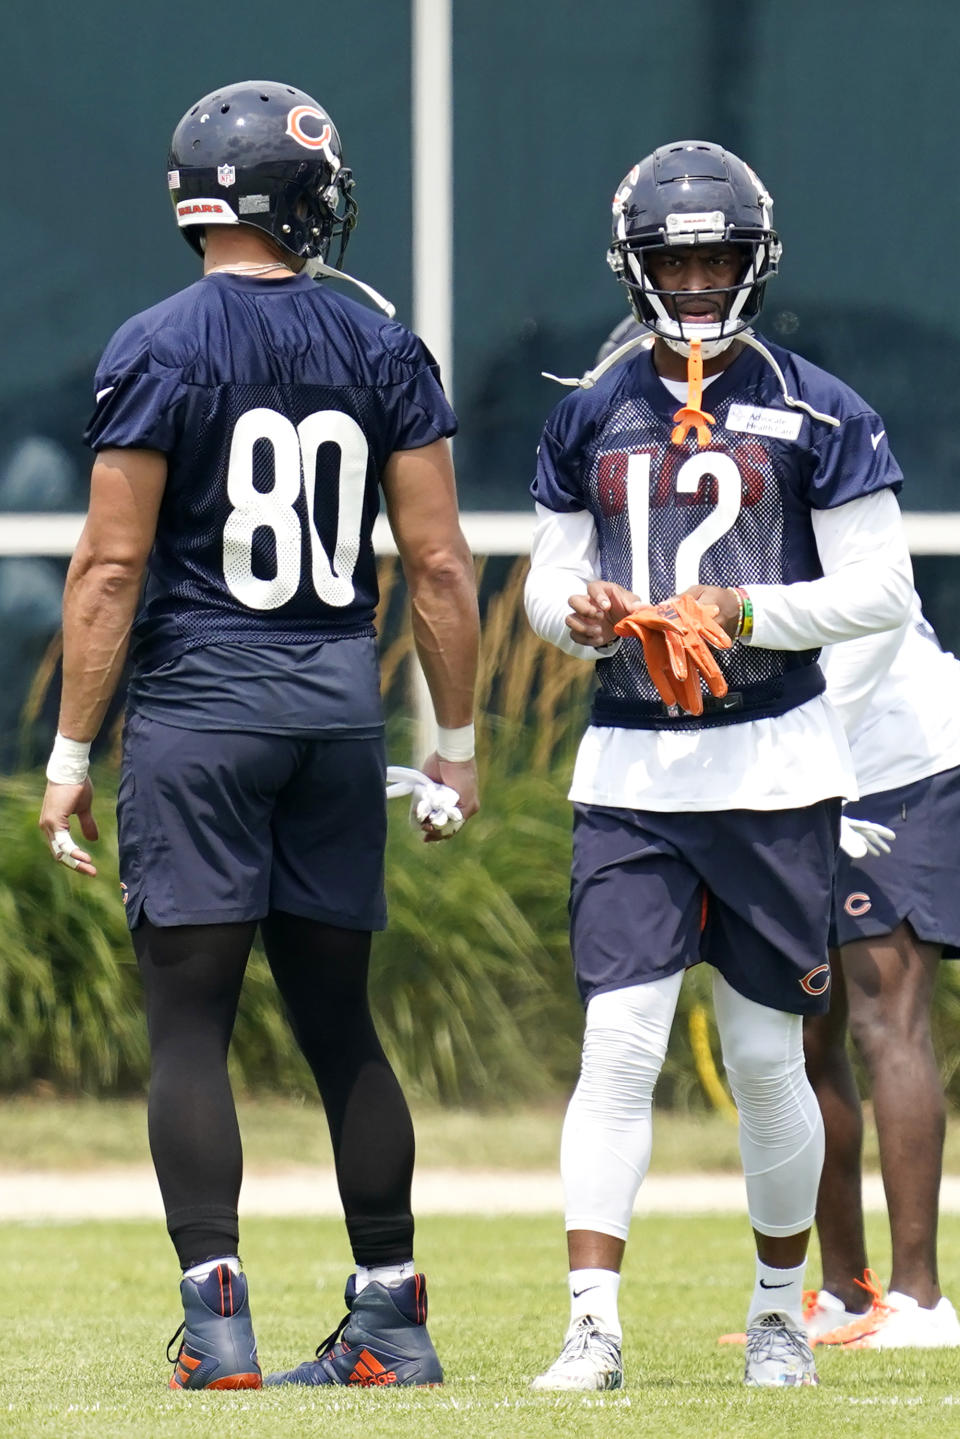 Chicago Bears wide receiver Allen Robinson II, right, talks with tight end Jimmy Graham during NFL football practice in Lake Forest, Ill., Wednesday, July 28, 2021. (AP Photo/Nam Y. Huh)